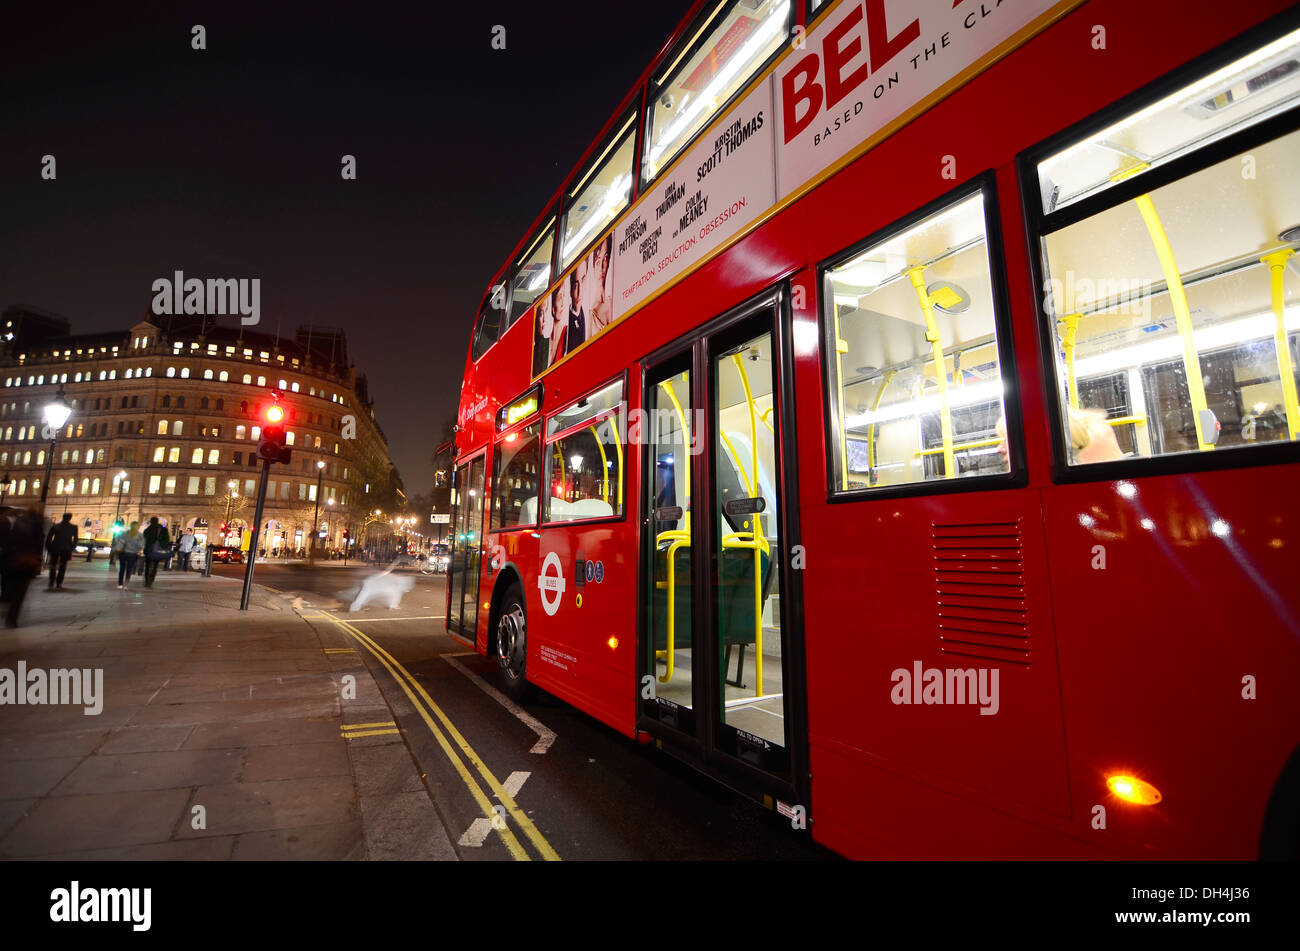 Red Double decker bus stopped at a traffic light in London Stock Photo